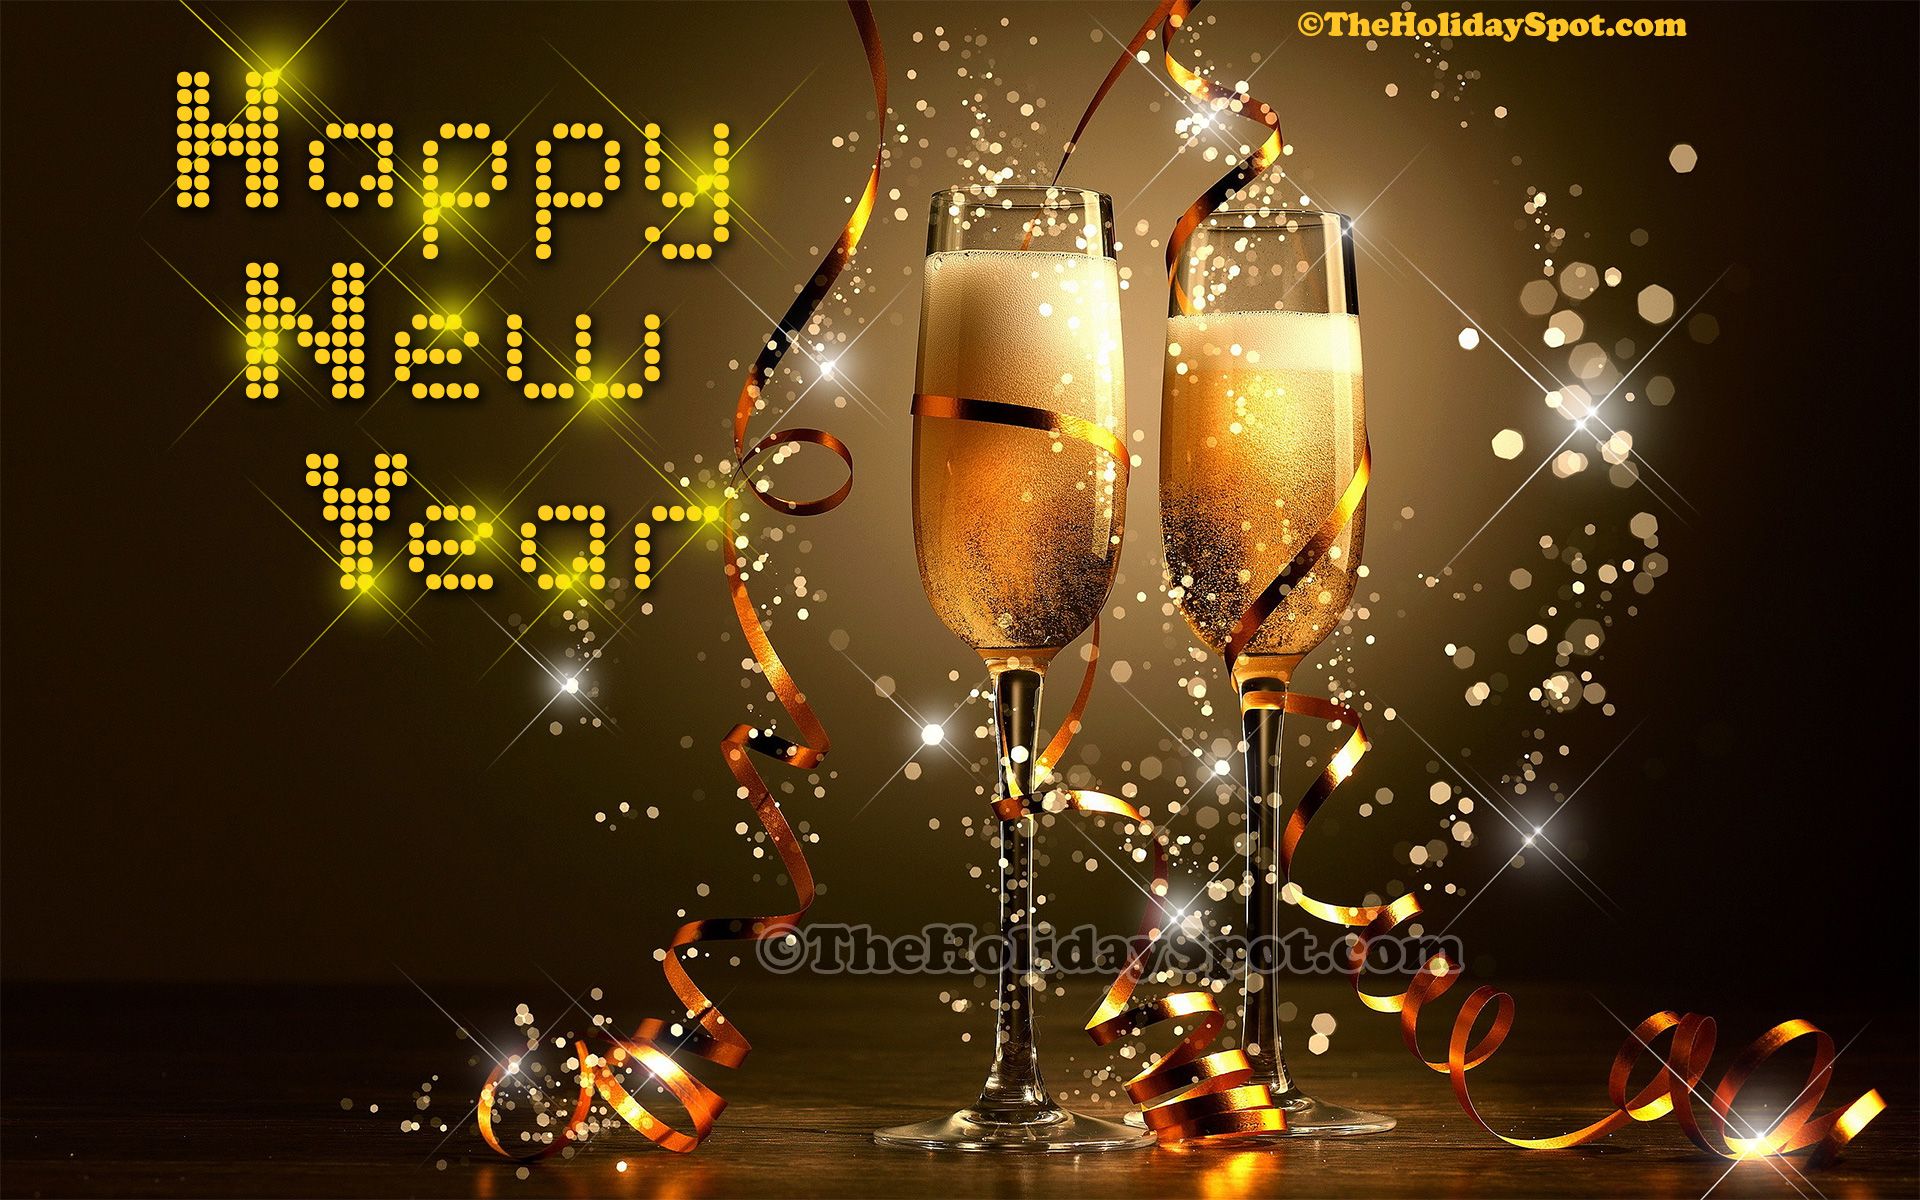 New Year 2016 Wallpapers for Desktop, Widescreen, Mobile, High resolution